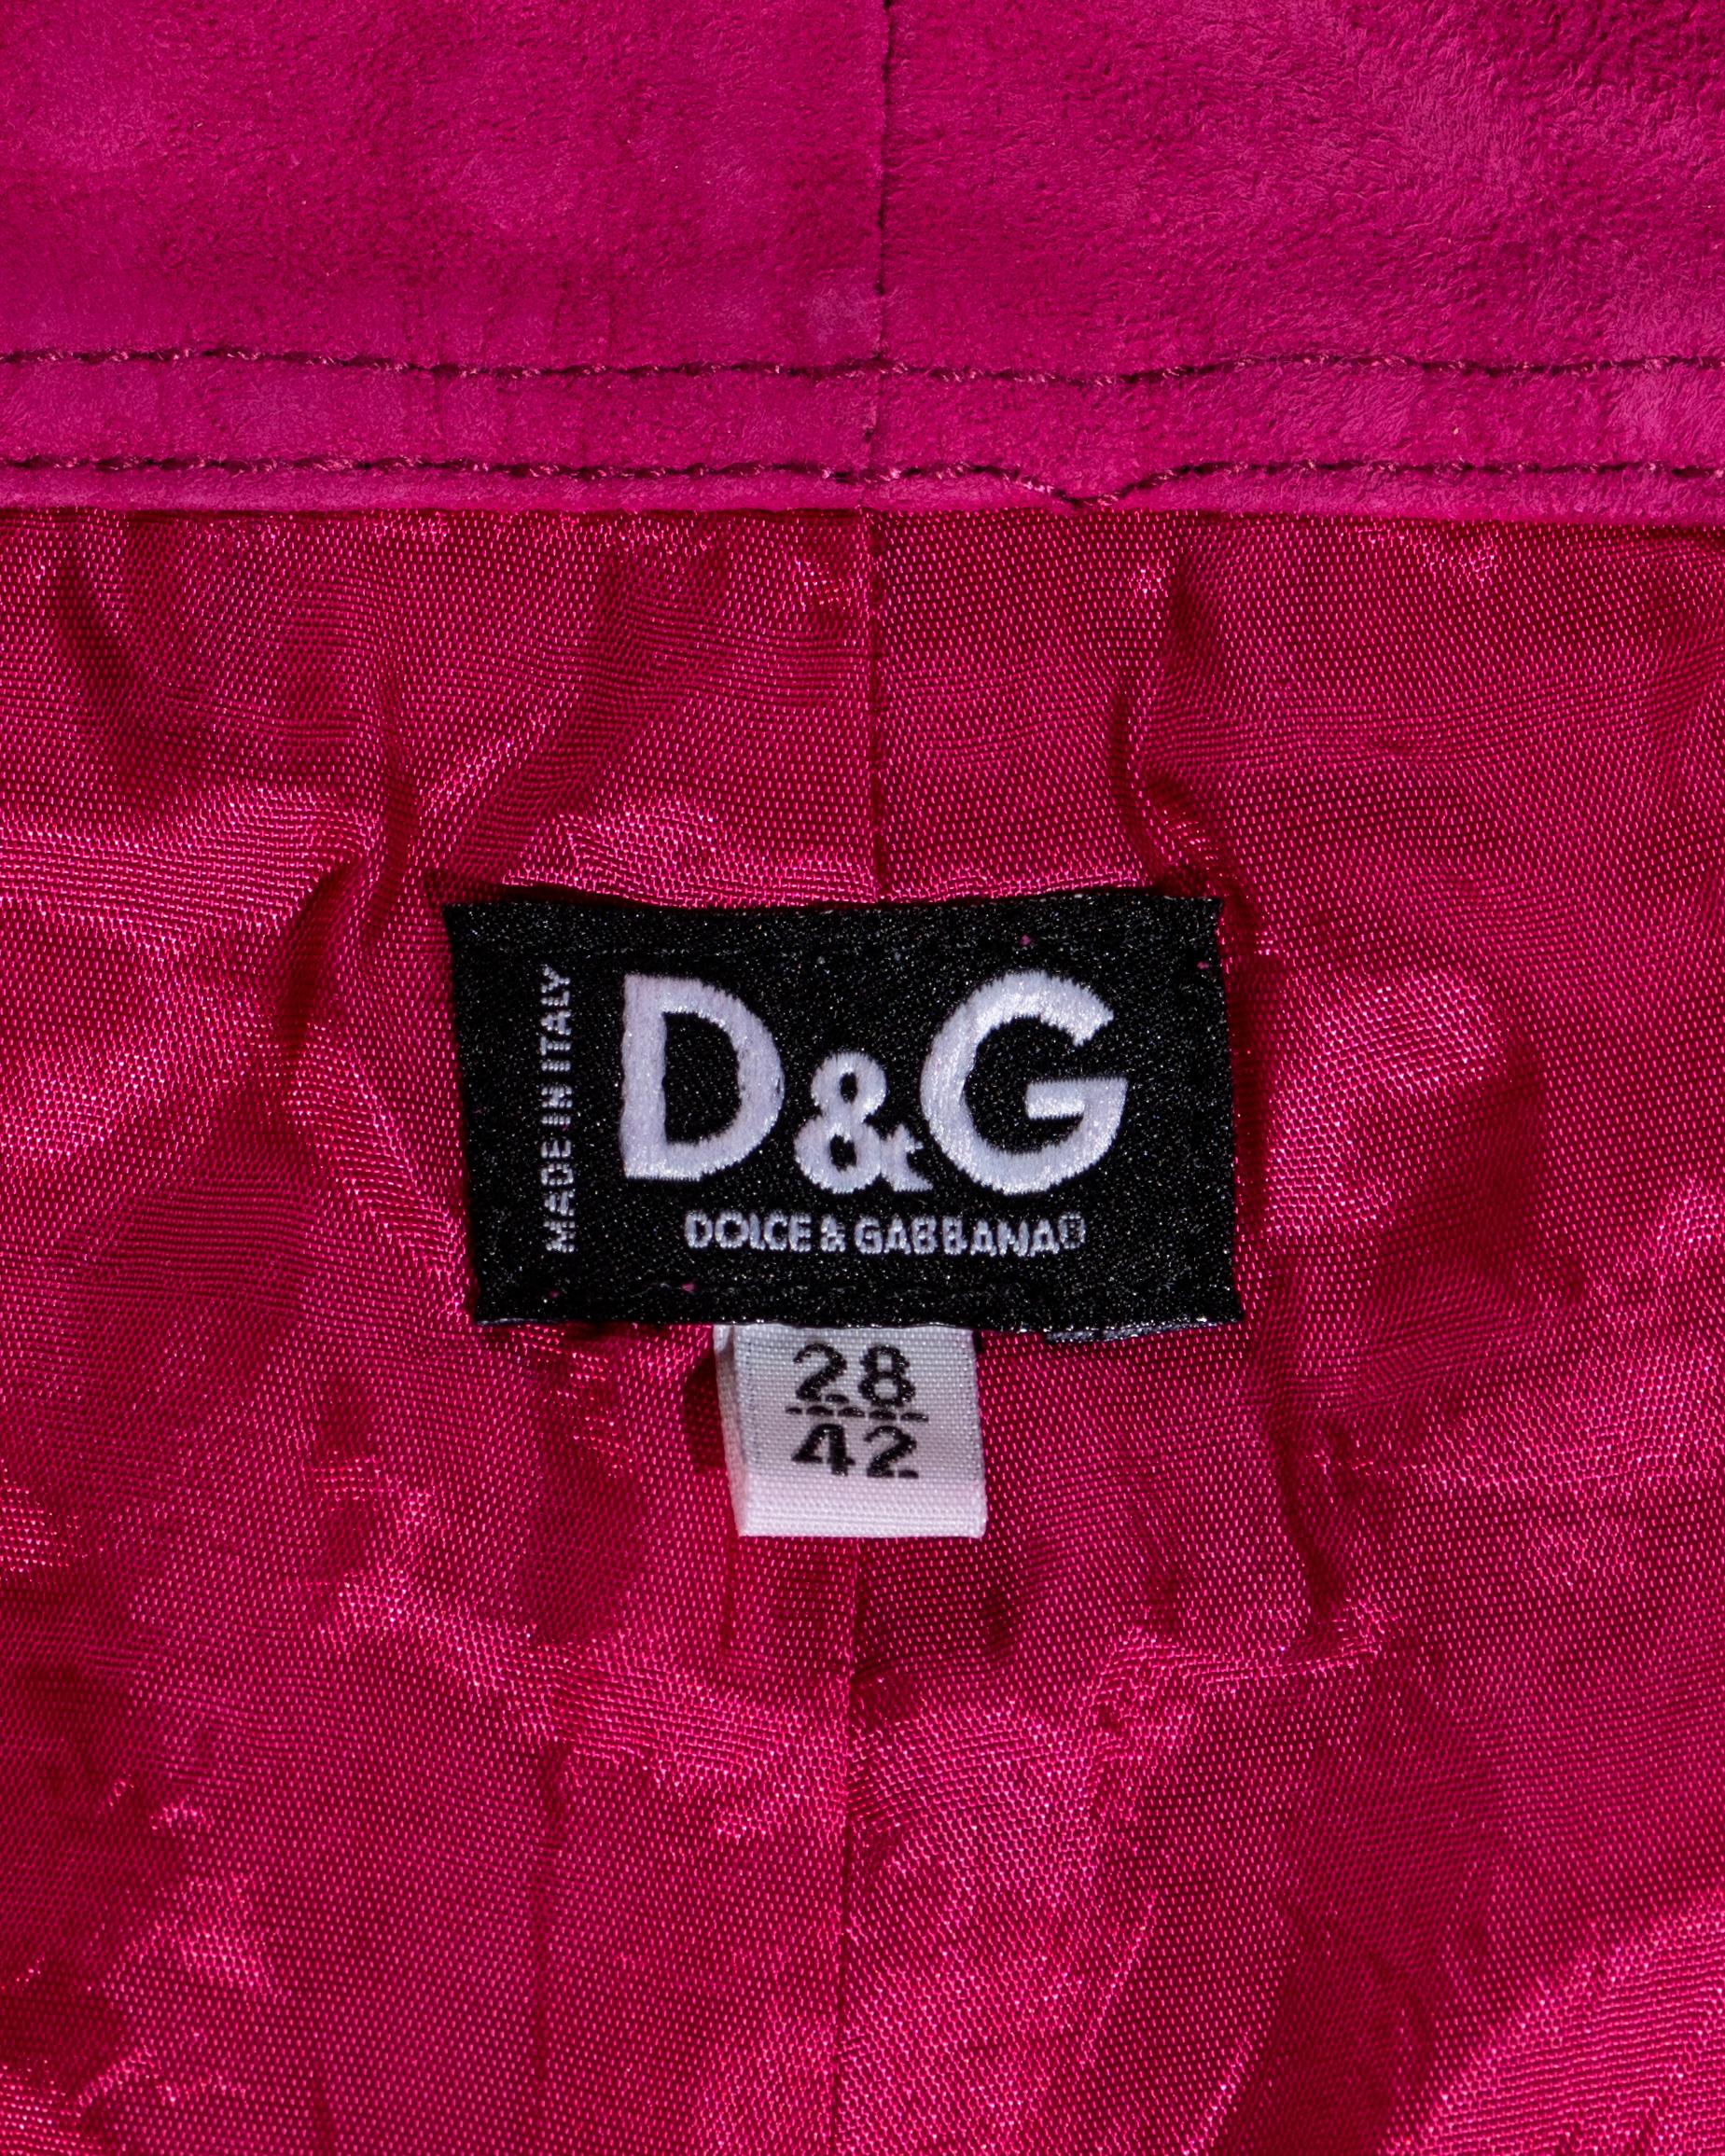 D&G by Dolce & Gabbana pink suede pants with crystals, c. 1998-1999 5